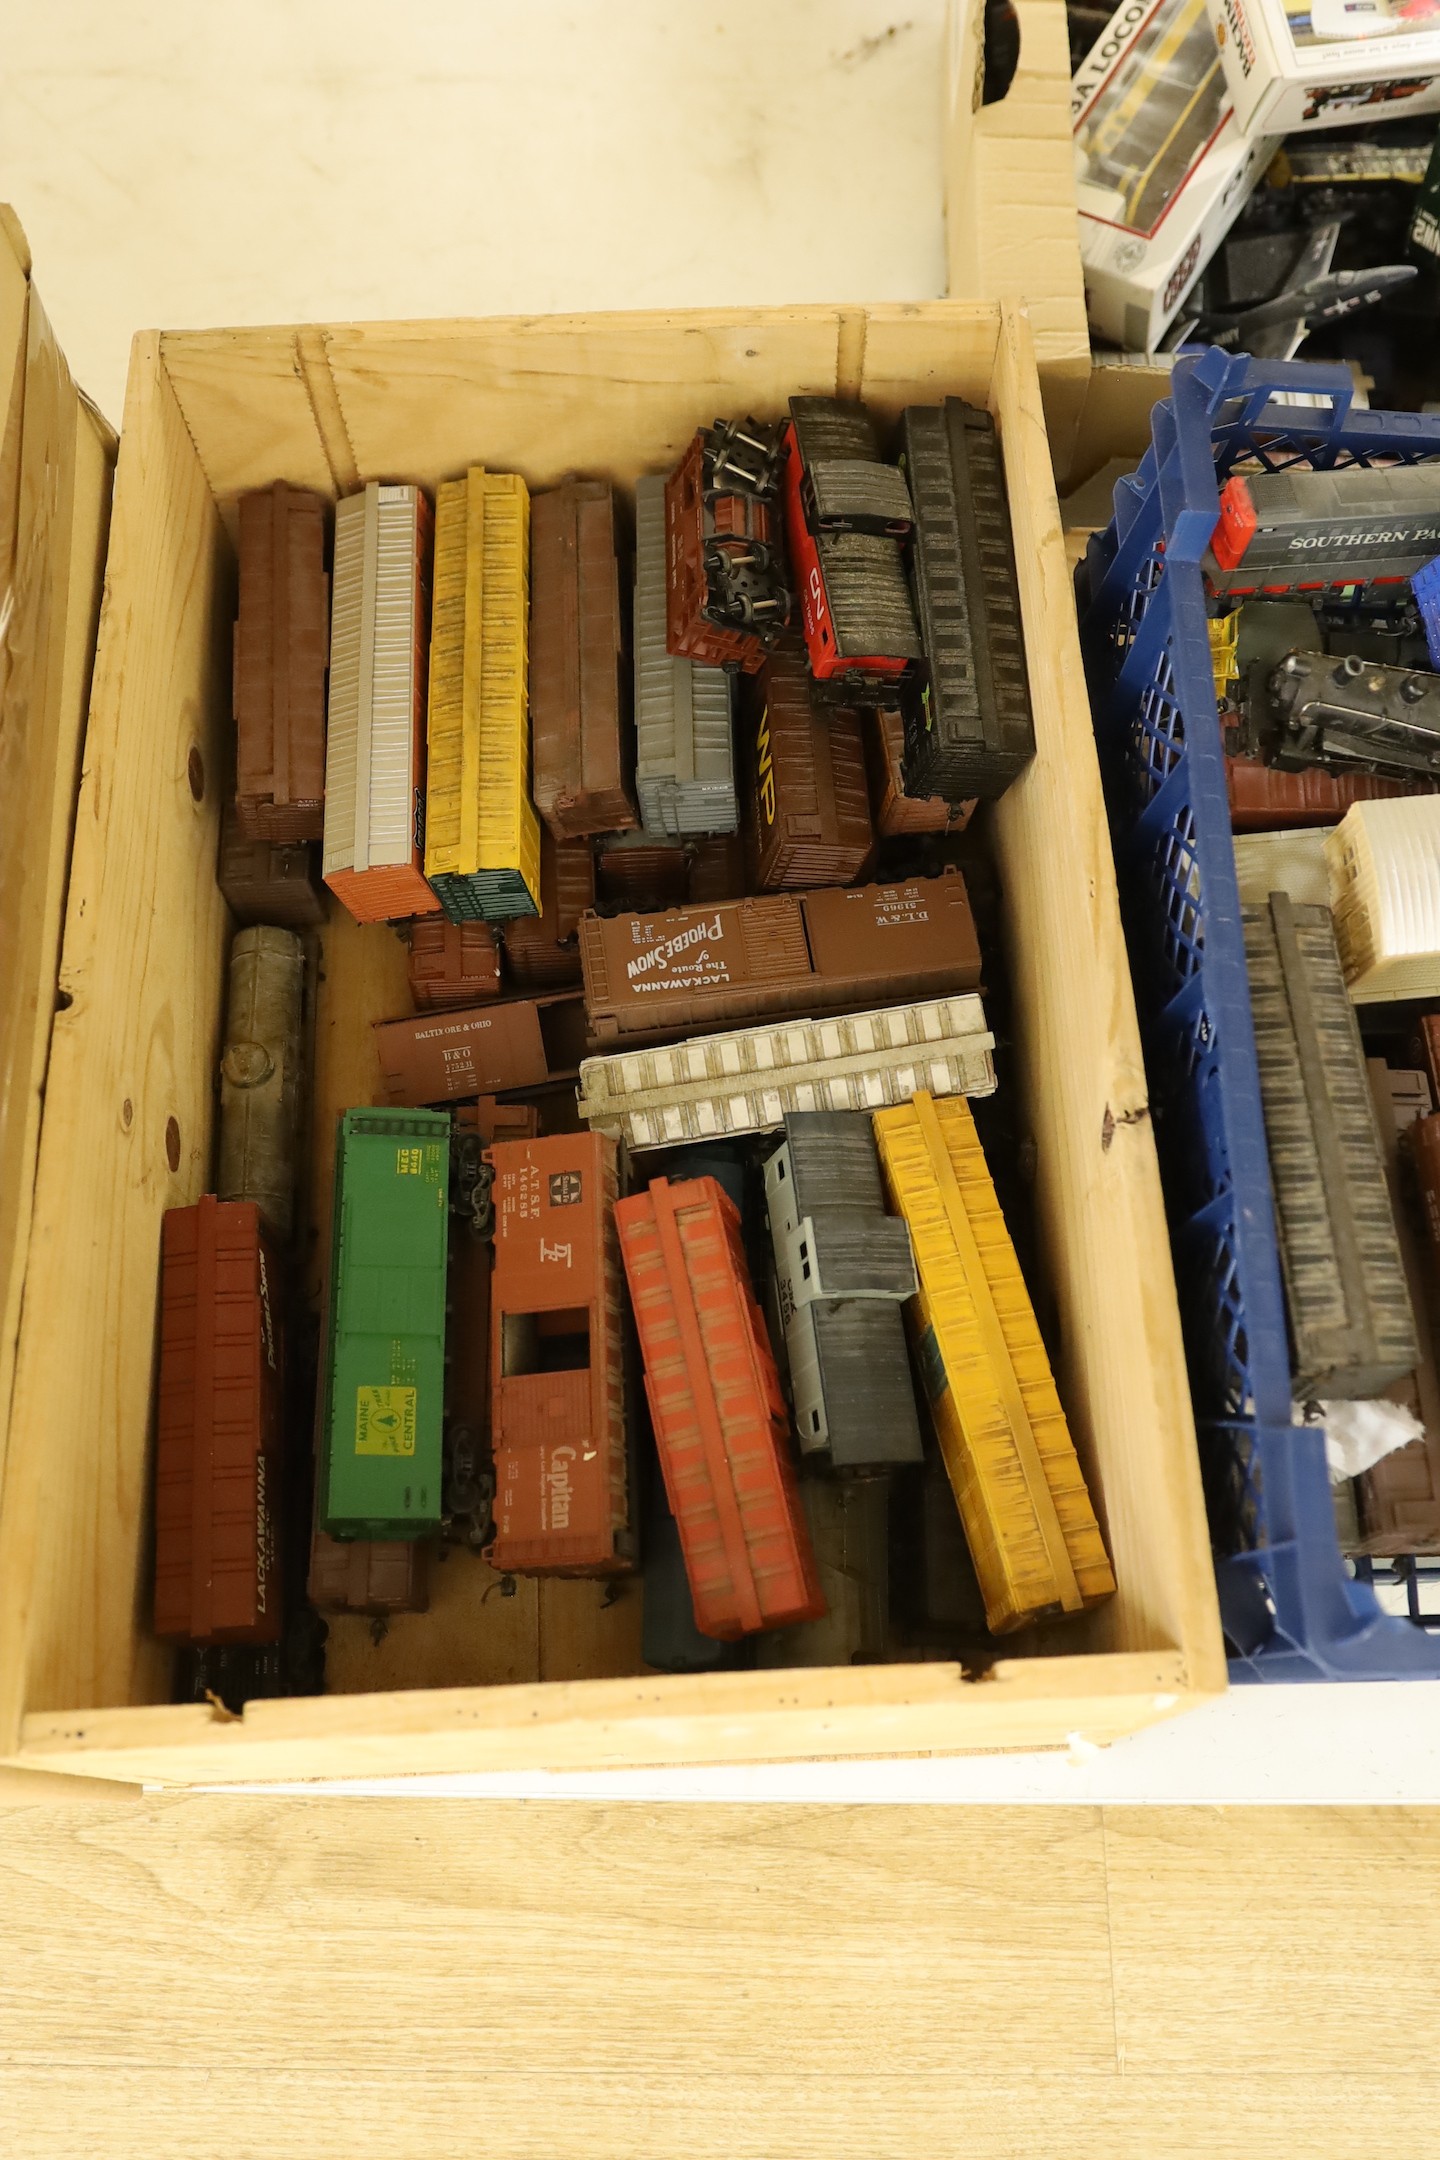 A large collection of 00 gauge toy locomotives and rolling stock